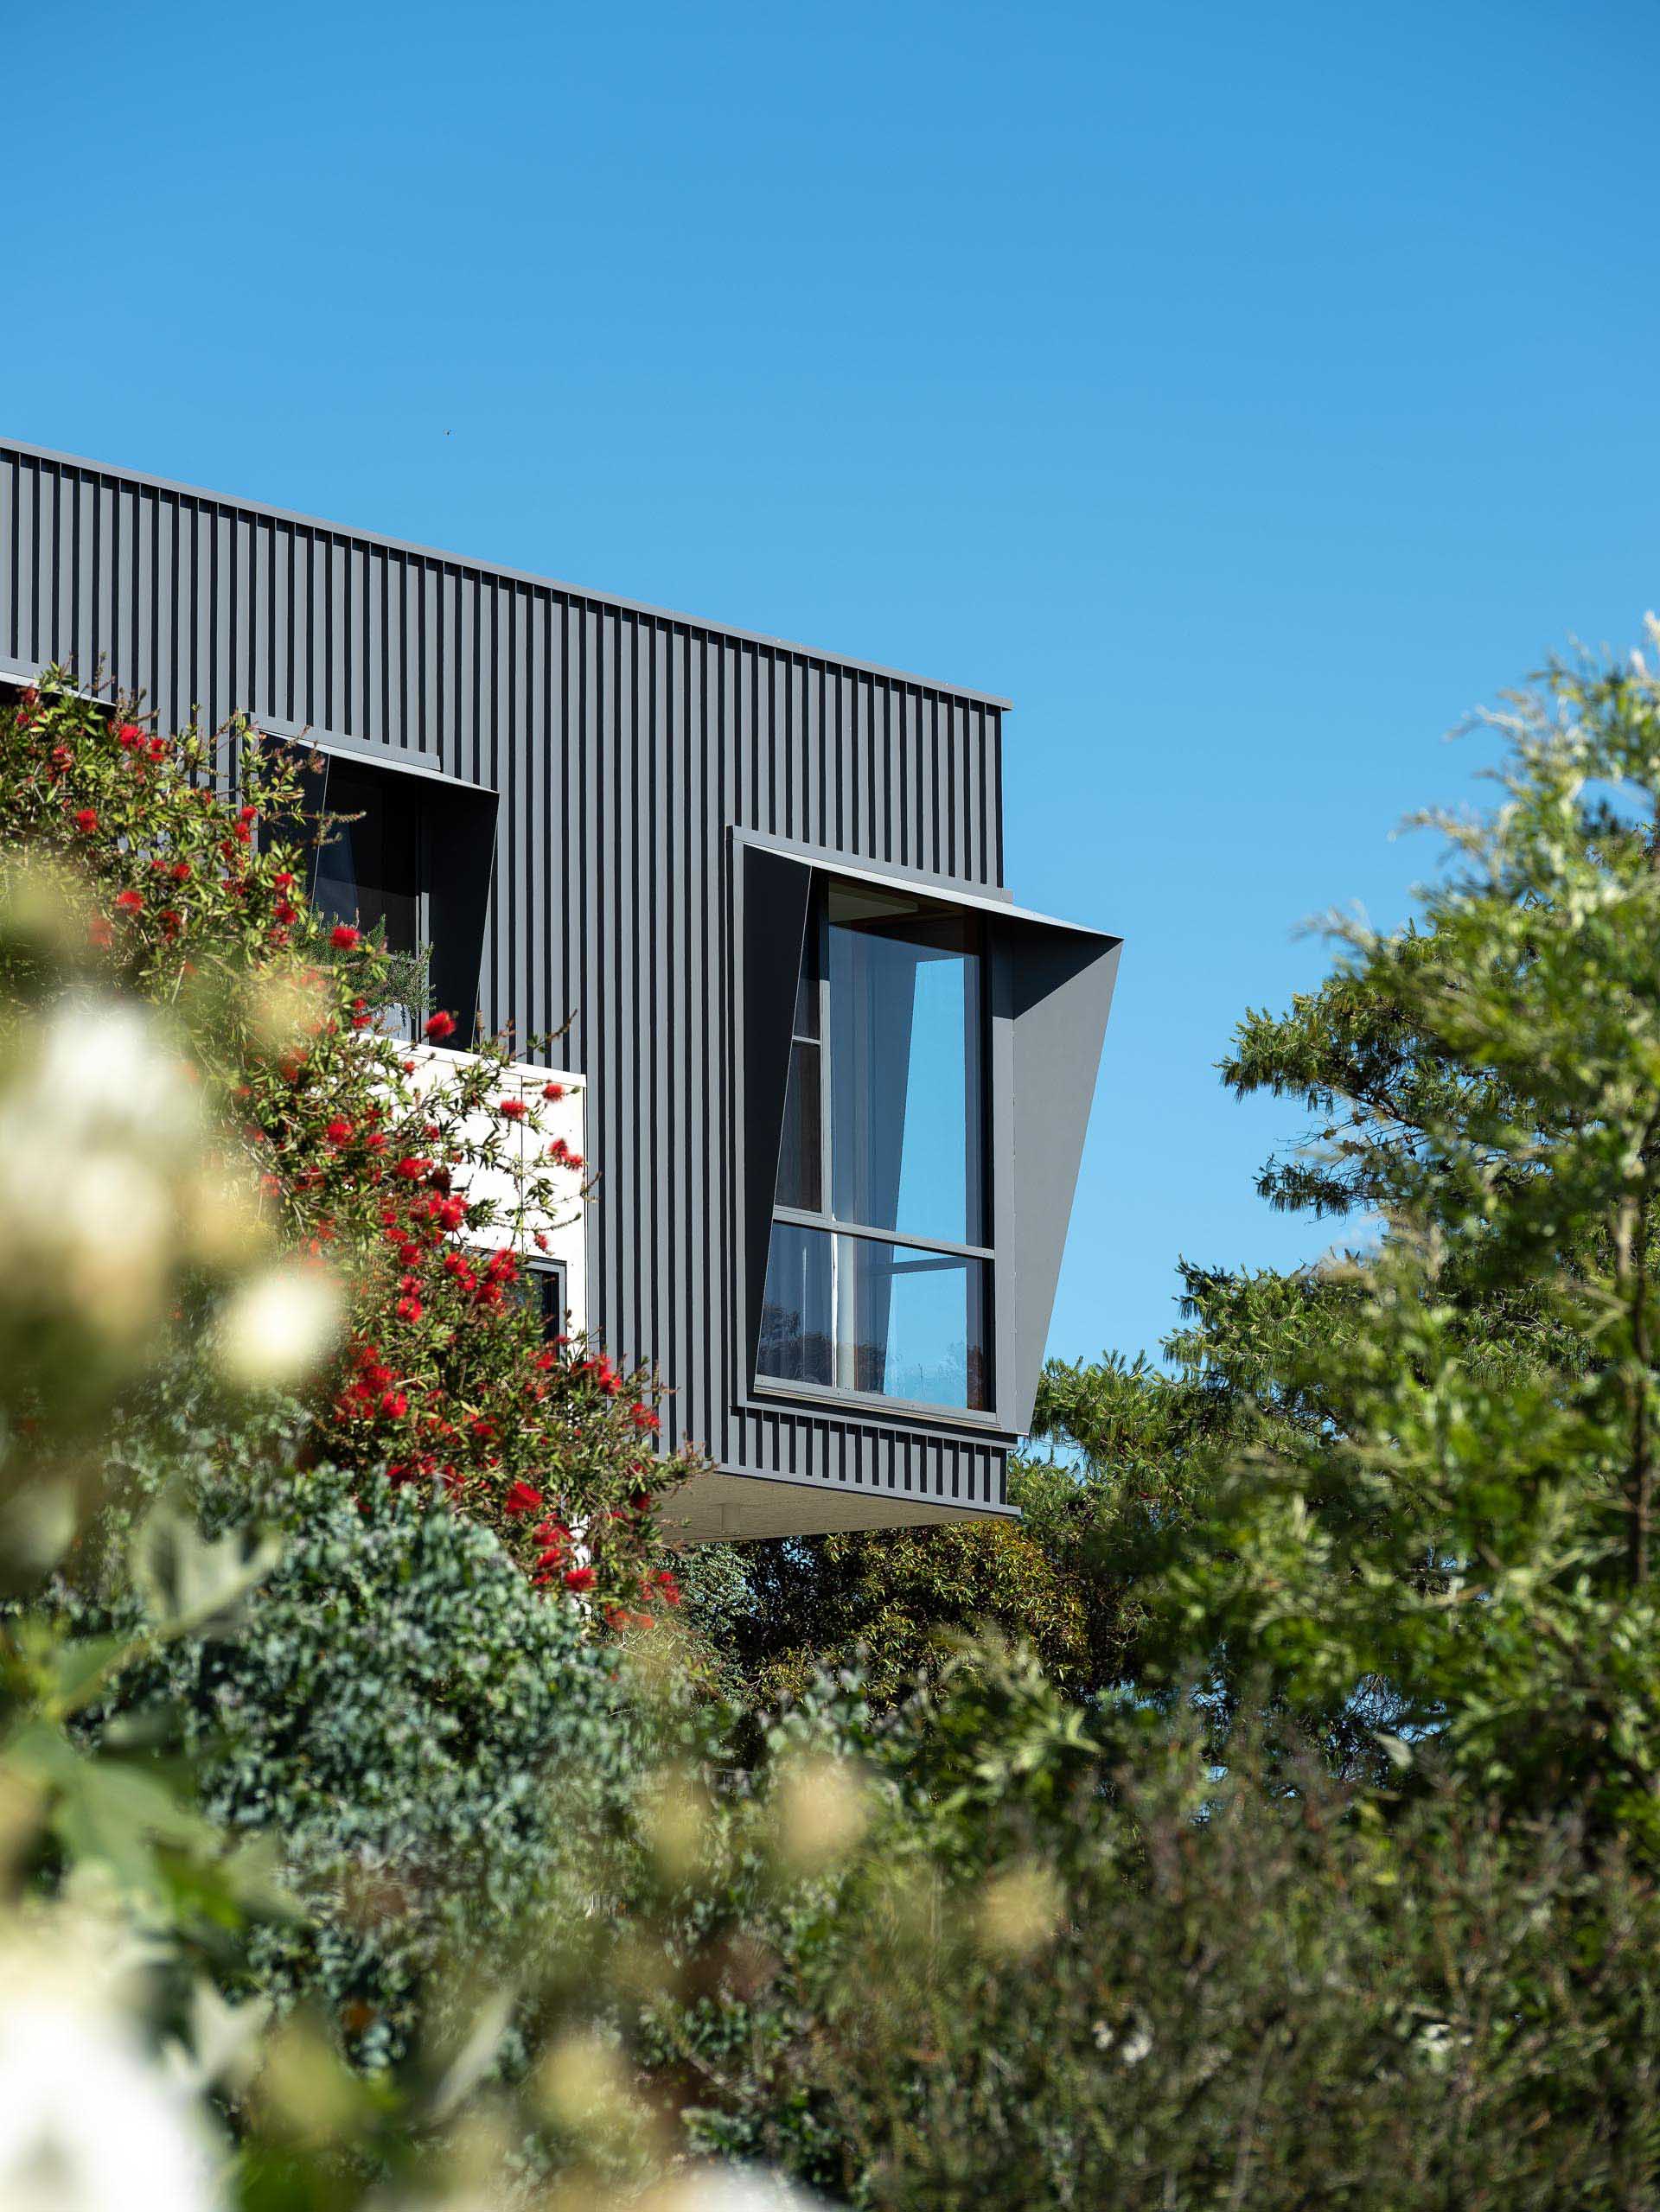 The modern black metal exterior of this home has angled window frames that protrude away from the windows, blocking the sun and offering a shaded interior.